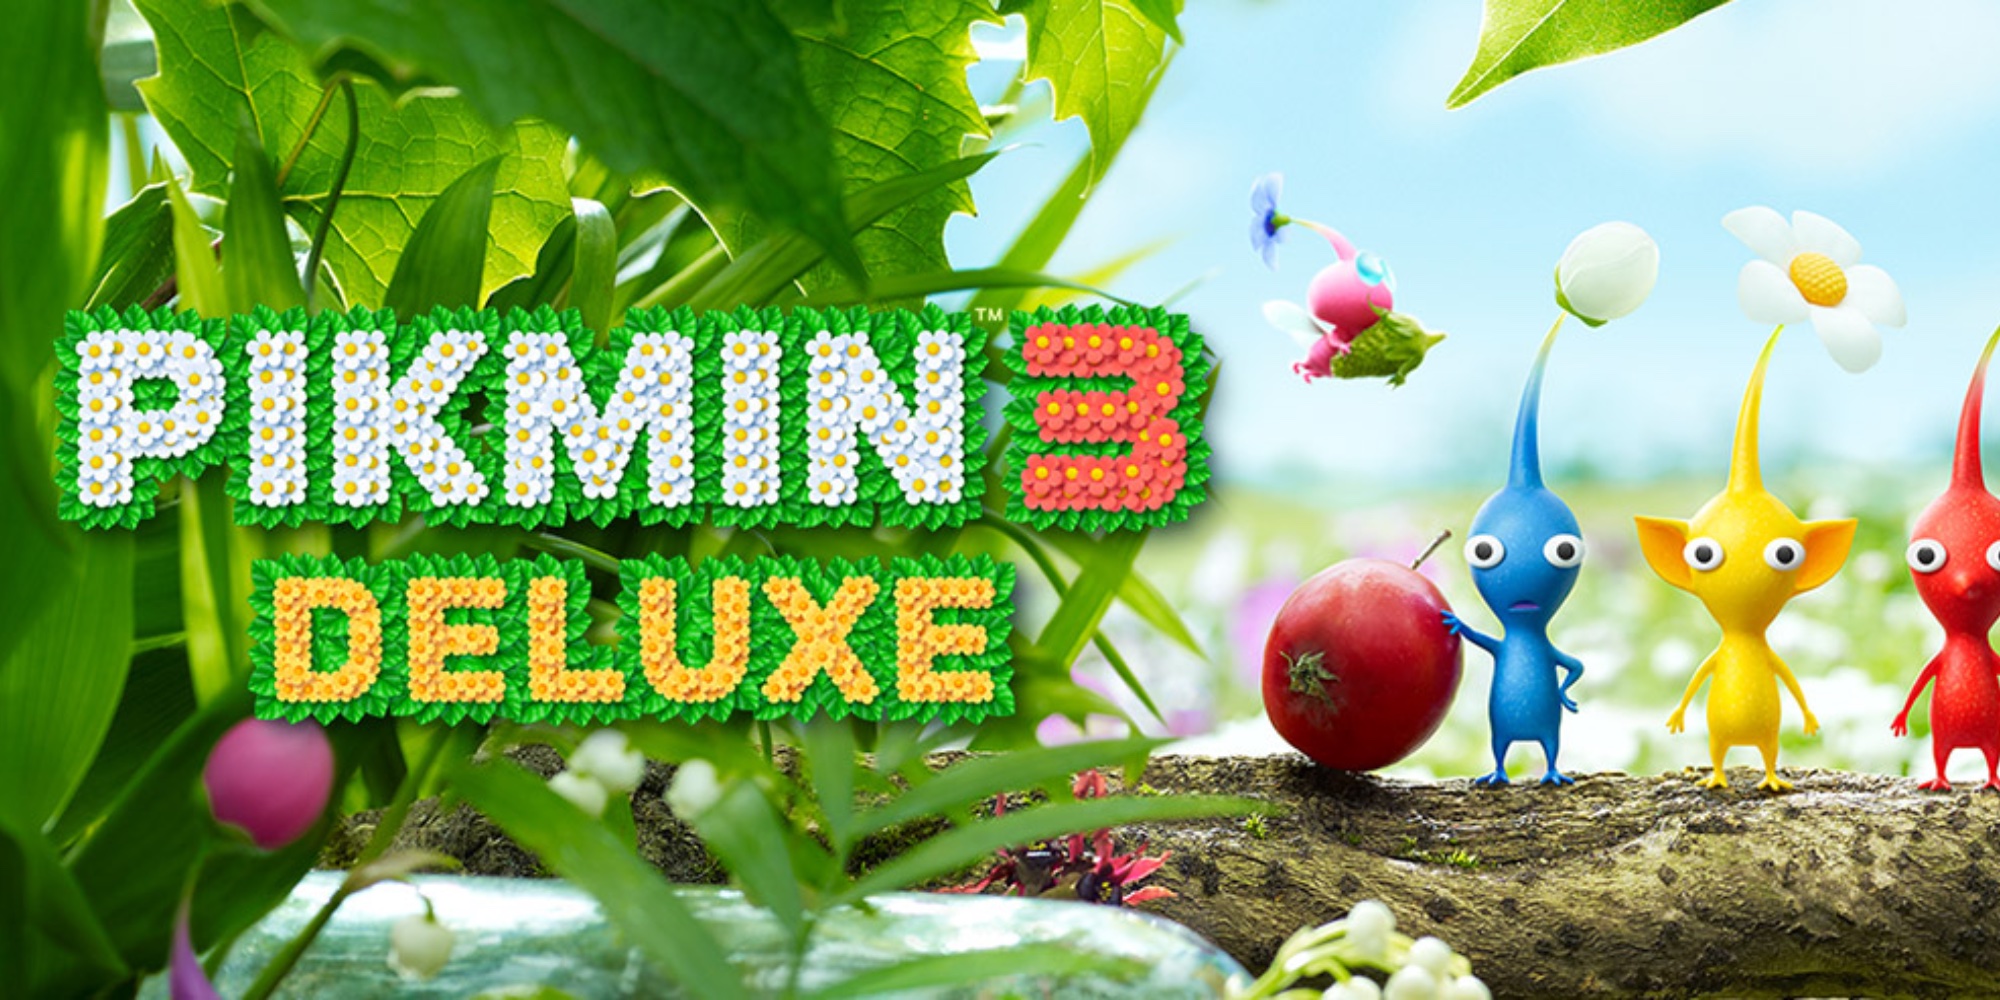 Pikmin 3 Deluxe lands on Nintendo Switch this fall - 9to5Toys